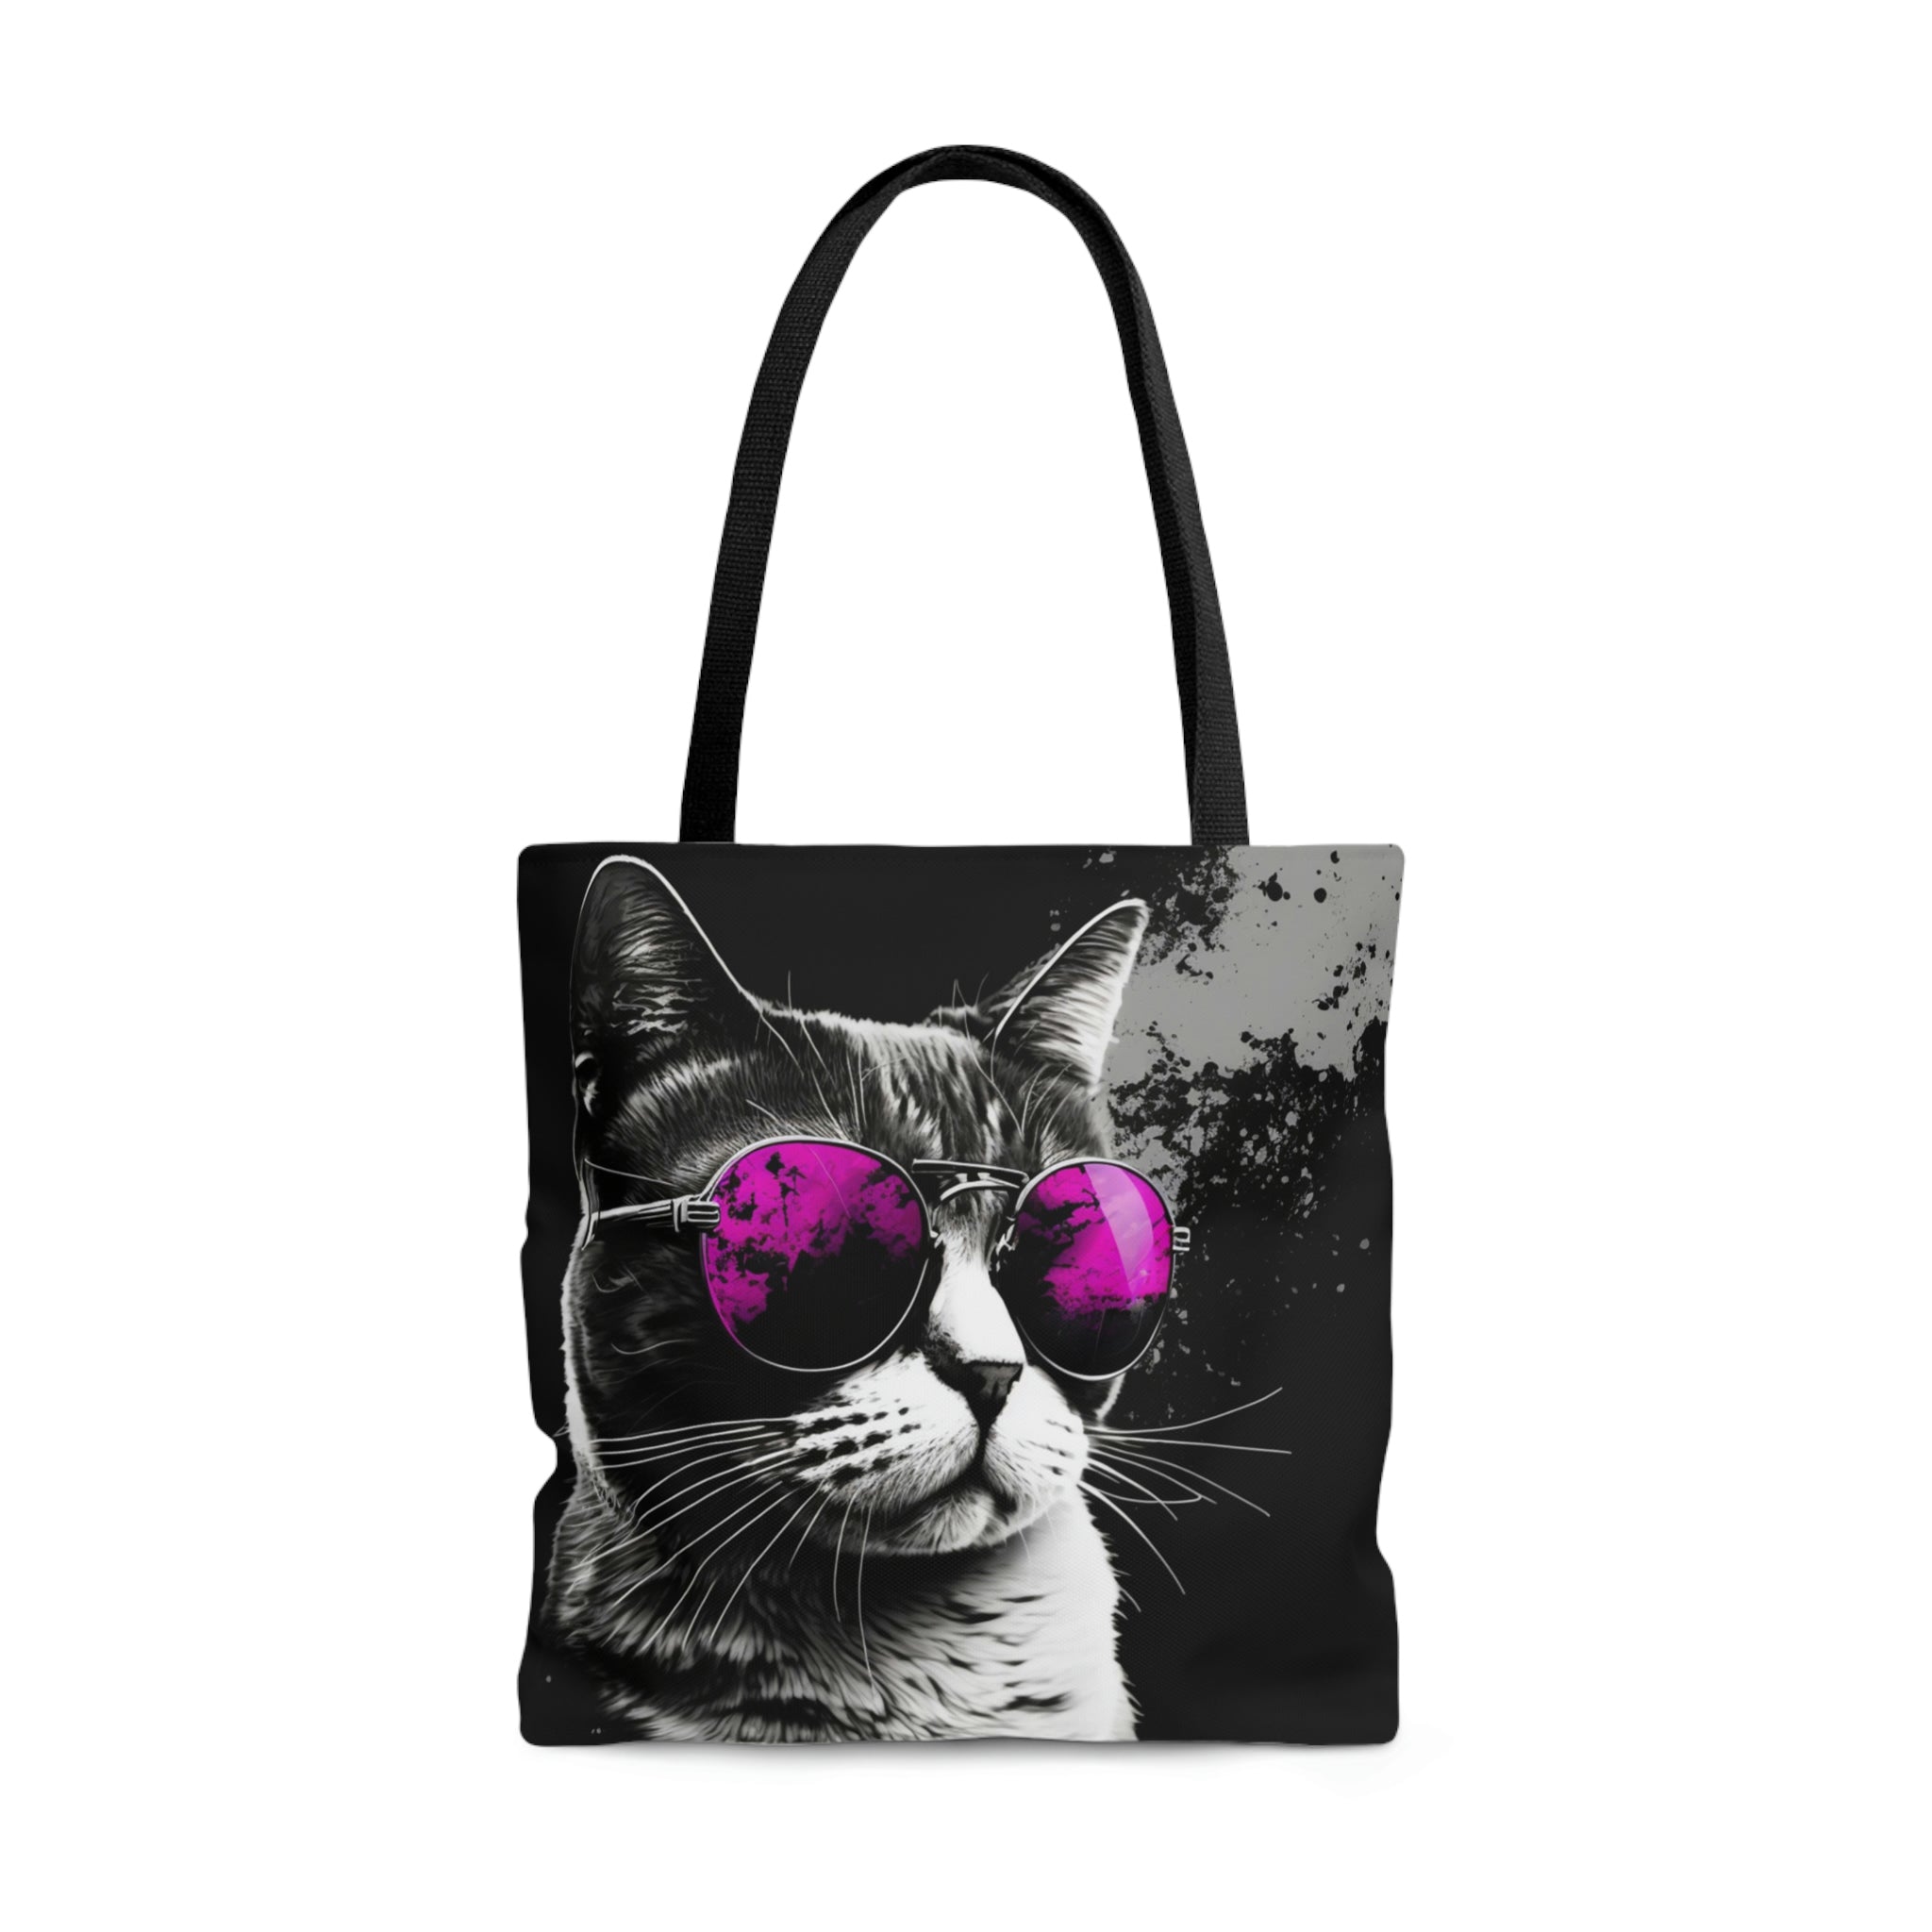 Cat Gift for Women, Cat Tote Bags for Women, Vibing Cat Gift, Cat Gift Women, Cat Gifts for Women, Cat Tote Bag for Women, Cat Mom Tote